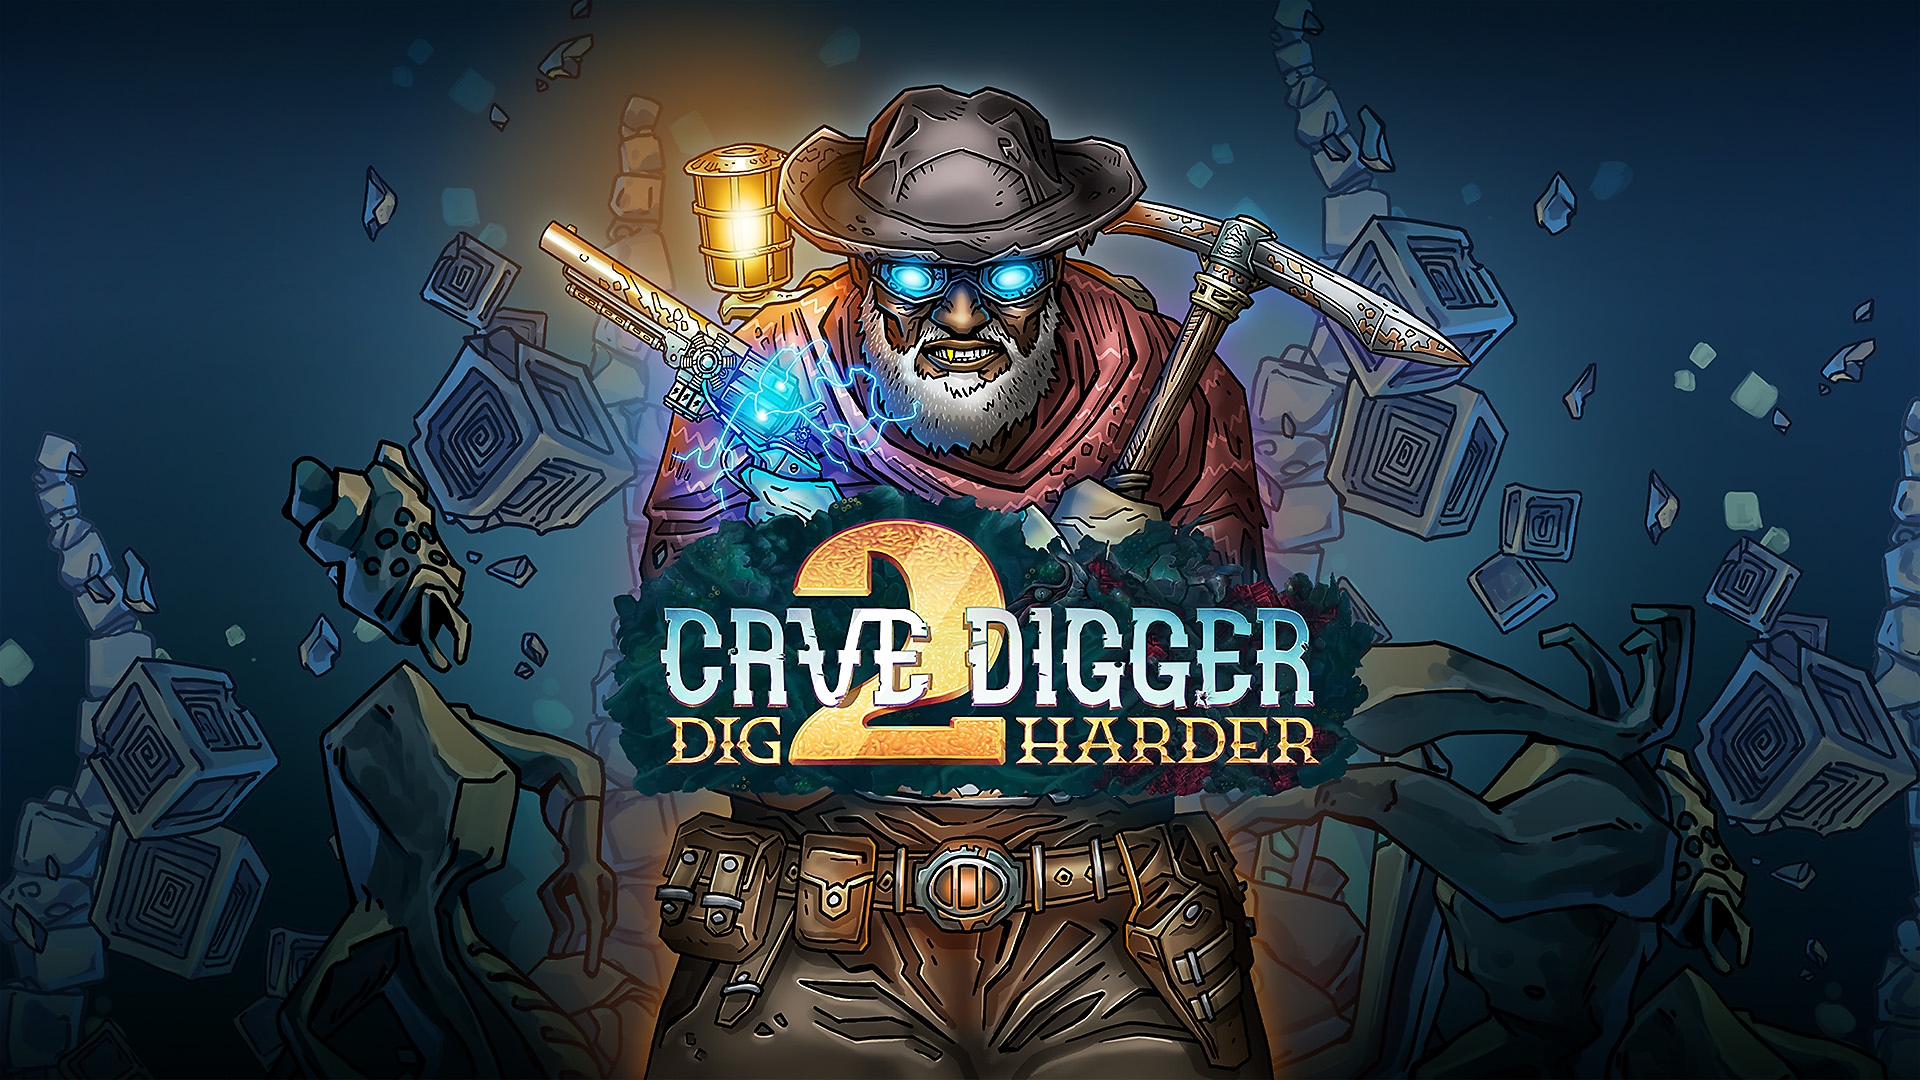 Cave Digger 2: Dig Harder - Launch Trailer | PS VR2 Games